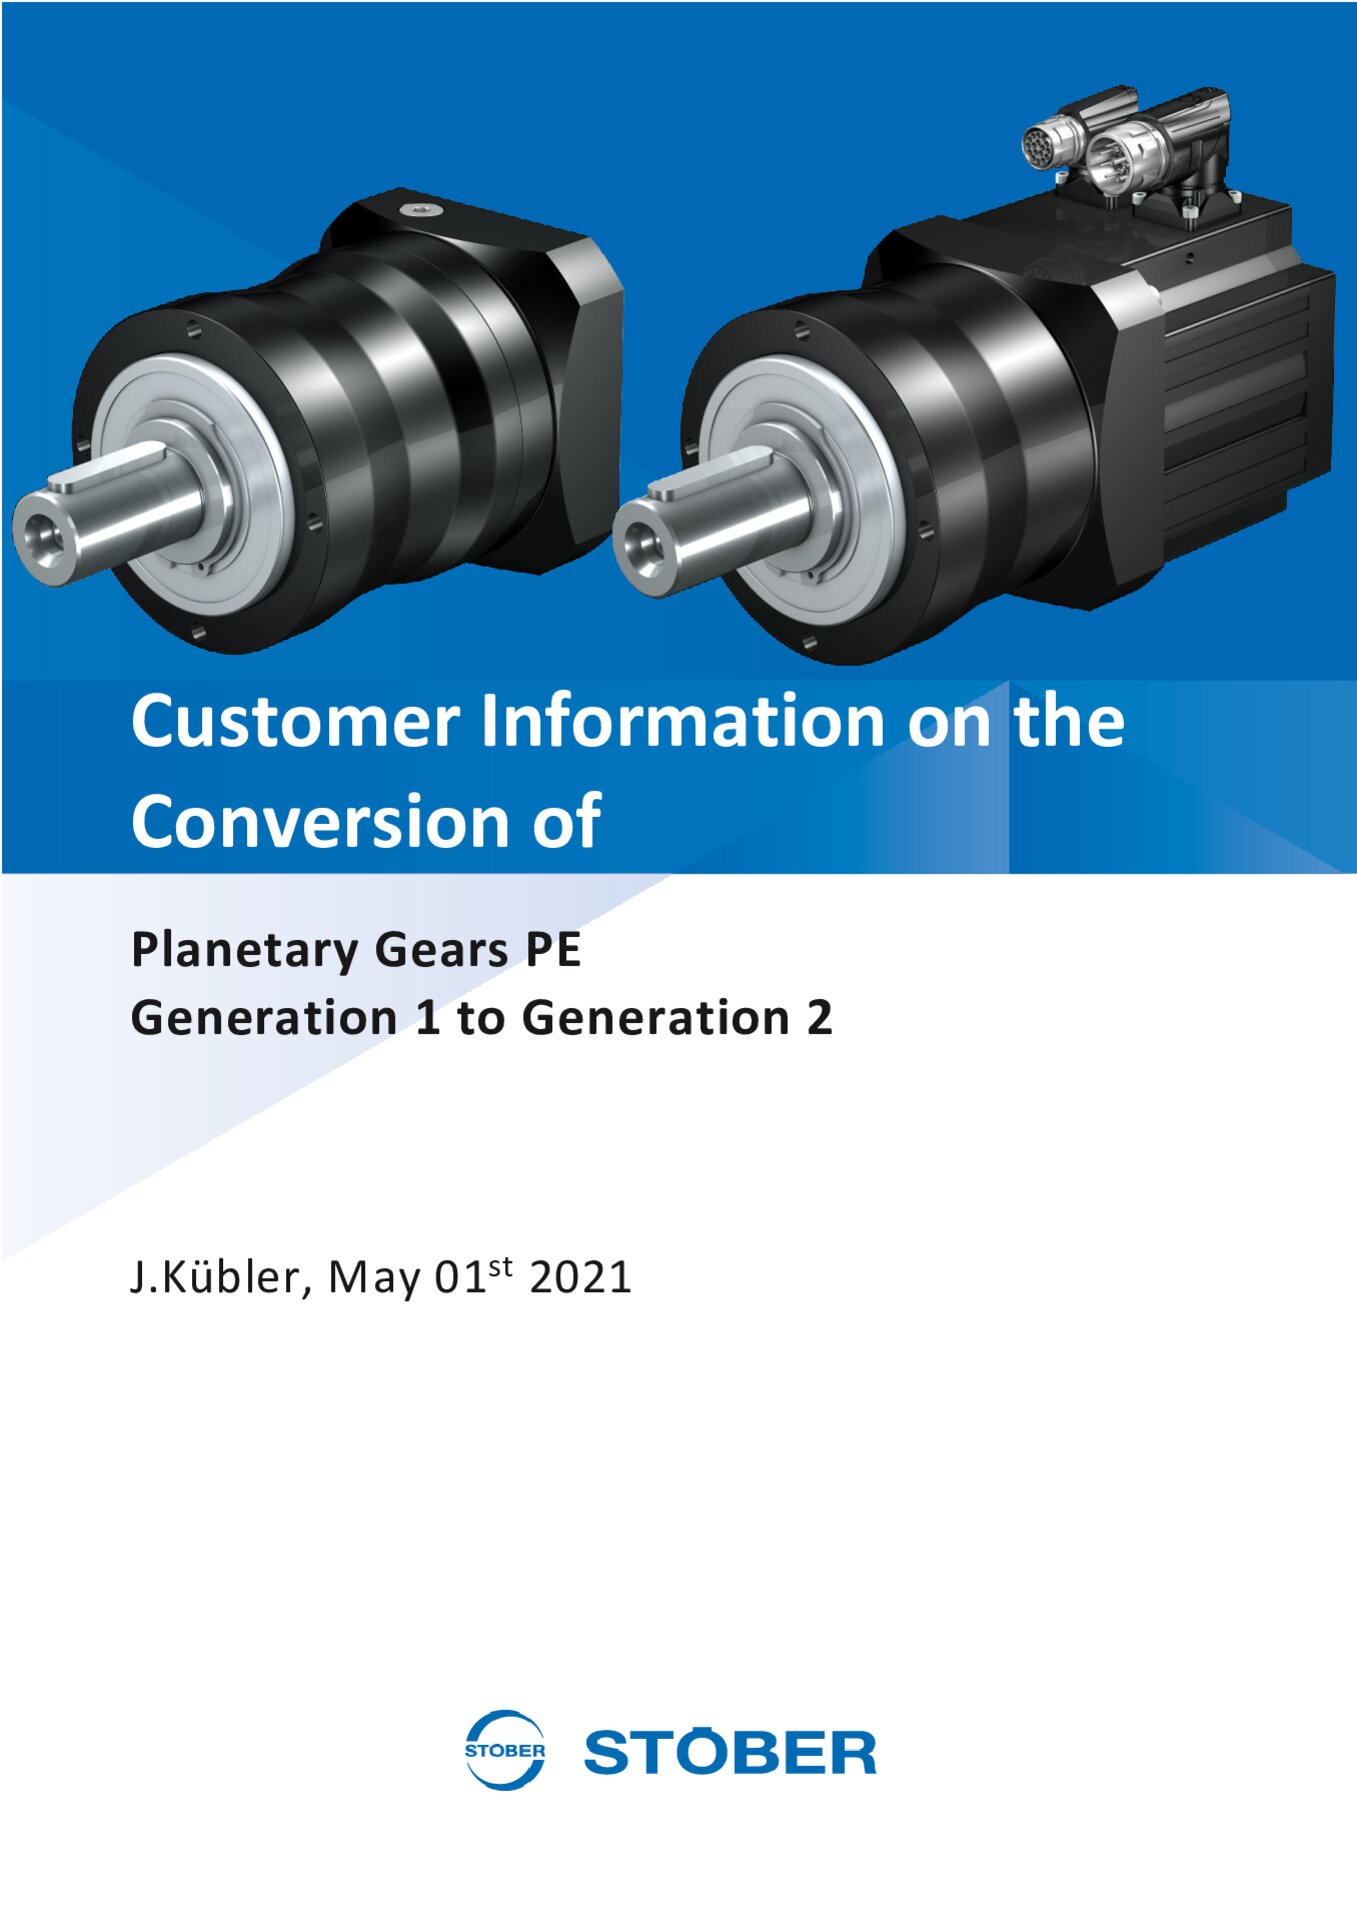 Customer Information Conversion of Planetary Gears PE Generation 1 to Generation 2